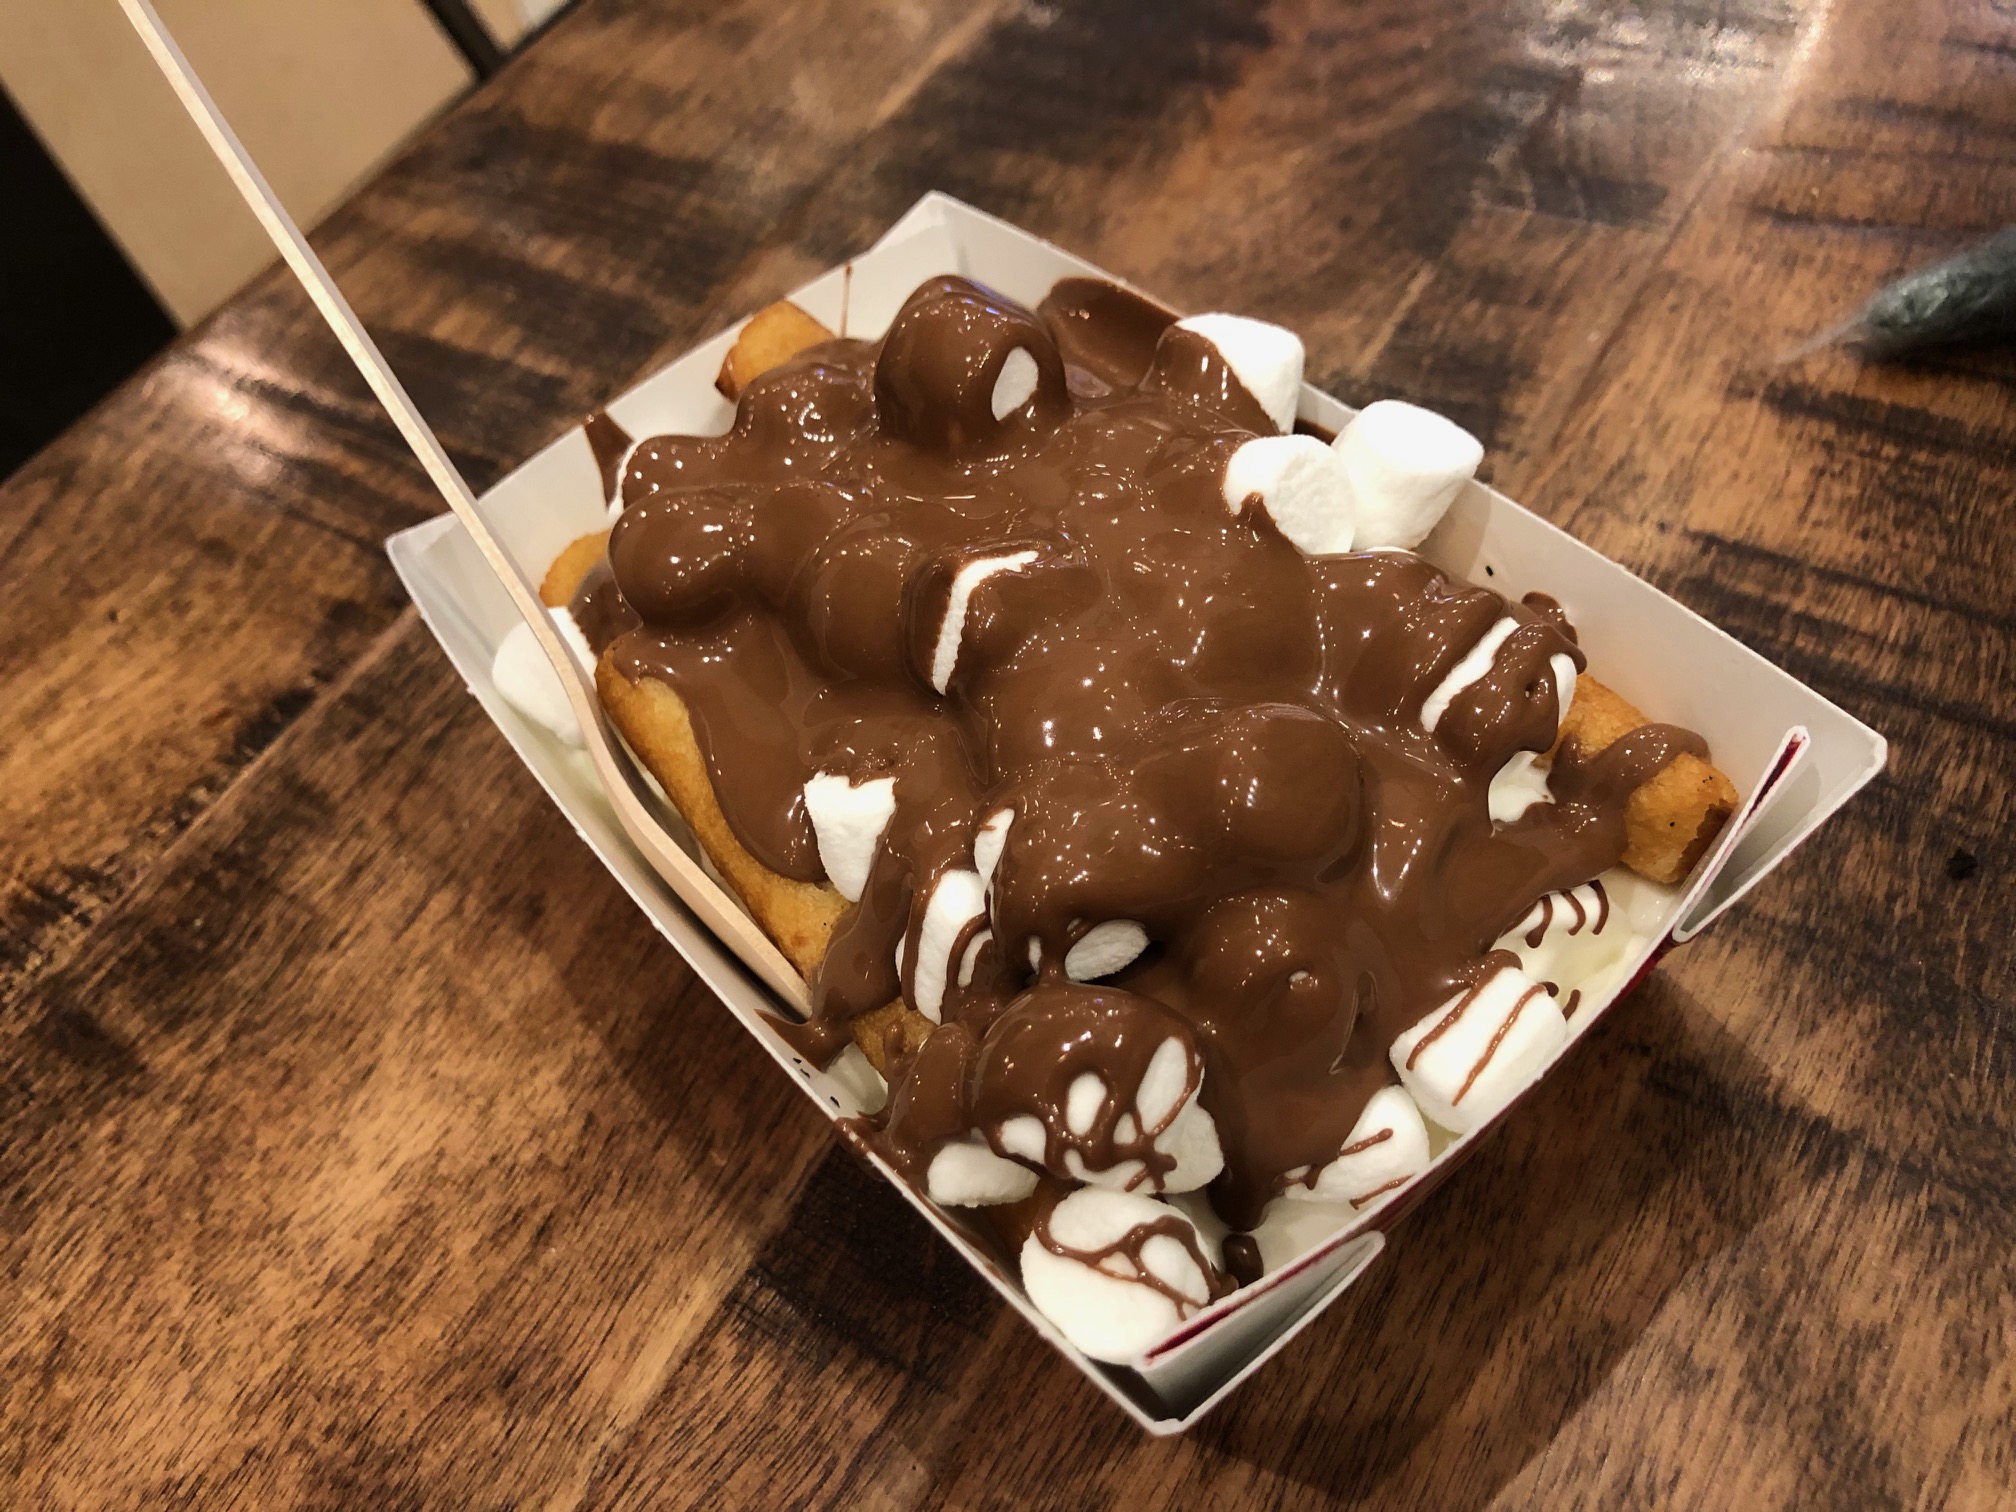 Dessert poutine in a cardboard container on a wooden table. Visible is a lot of chocolate sauce covering mini marshmallows and small churros-like fries